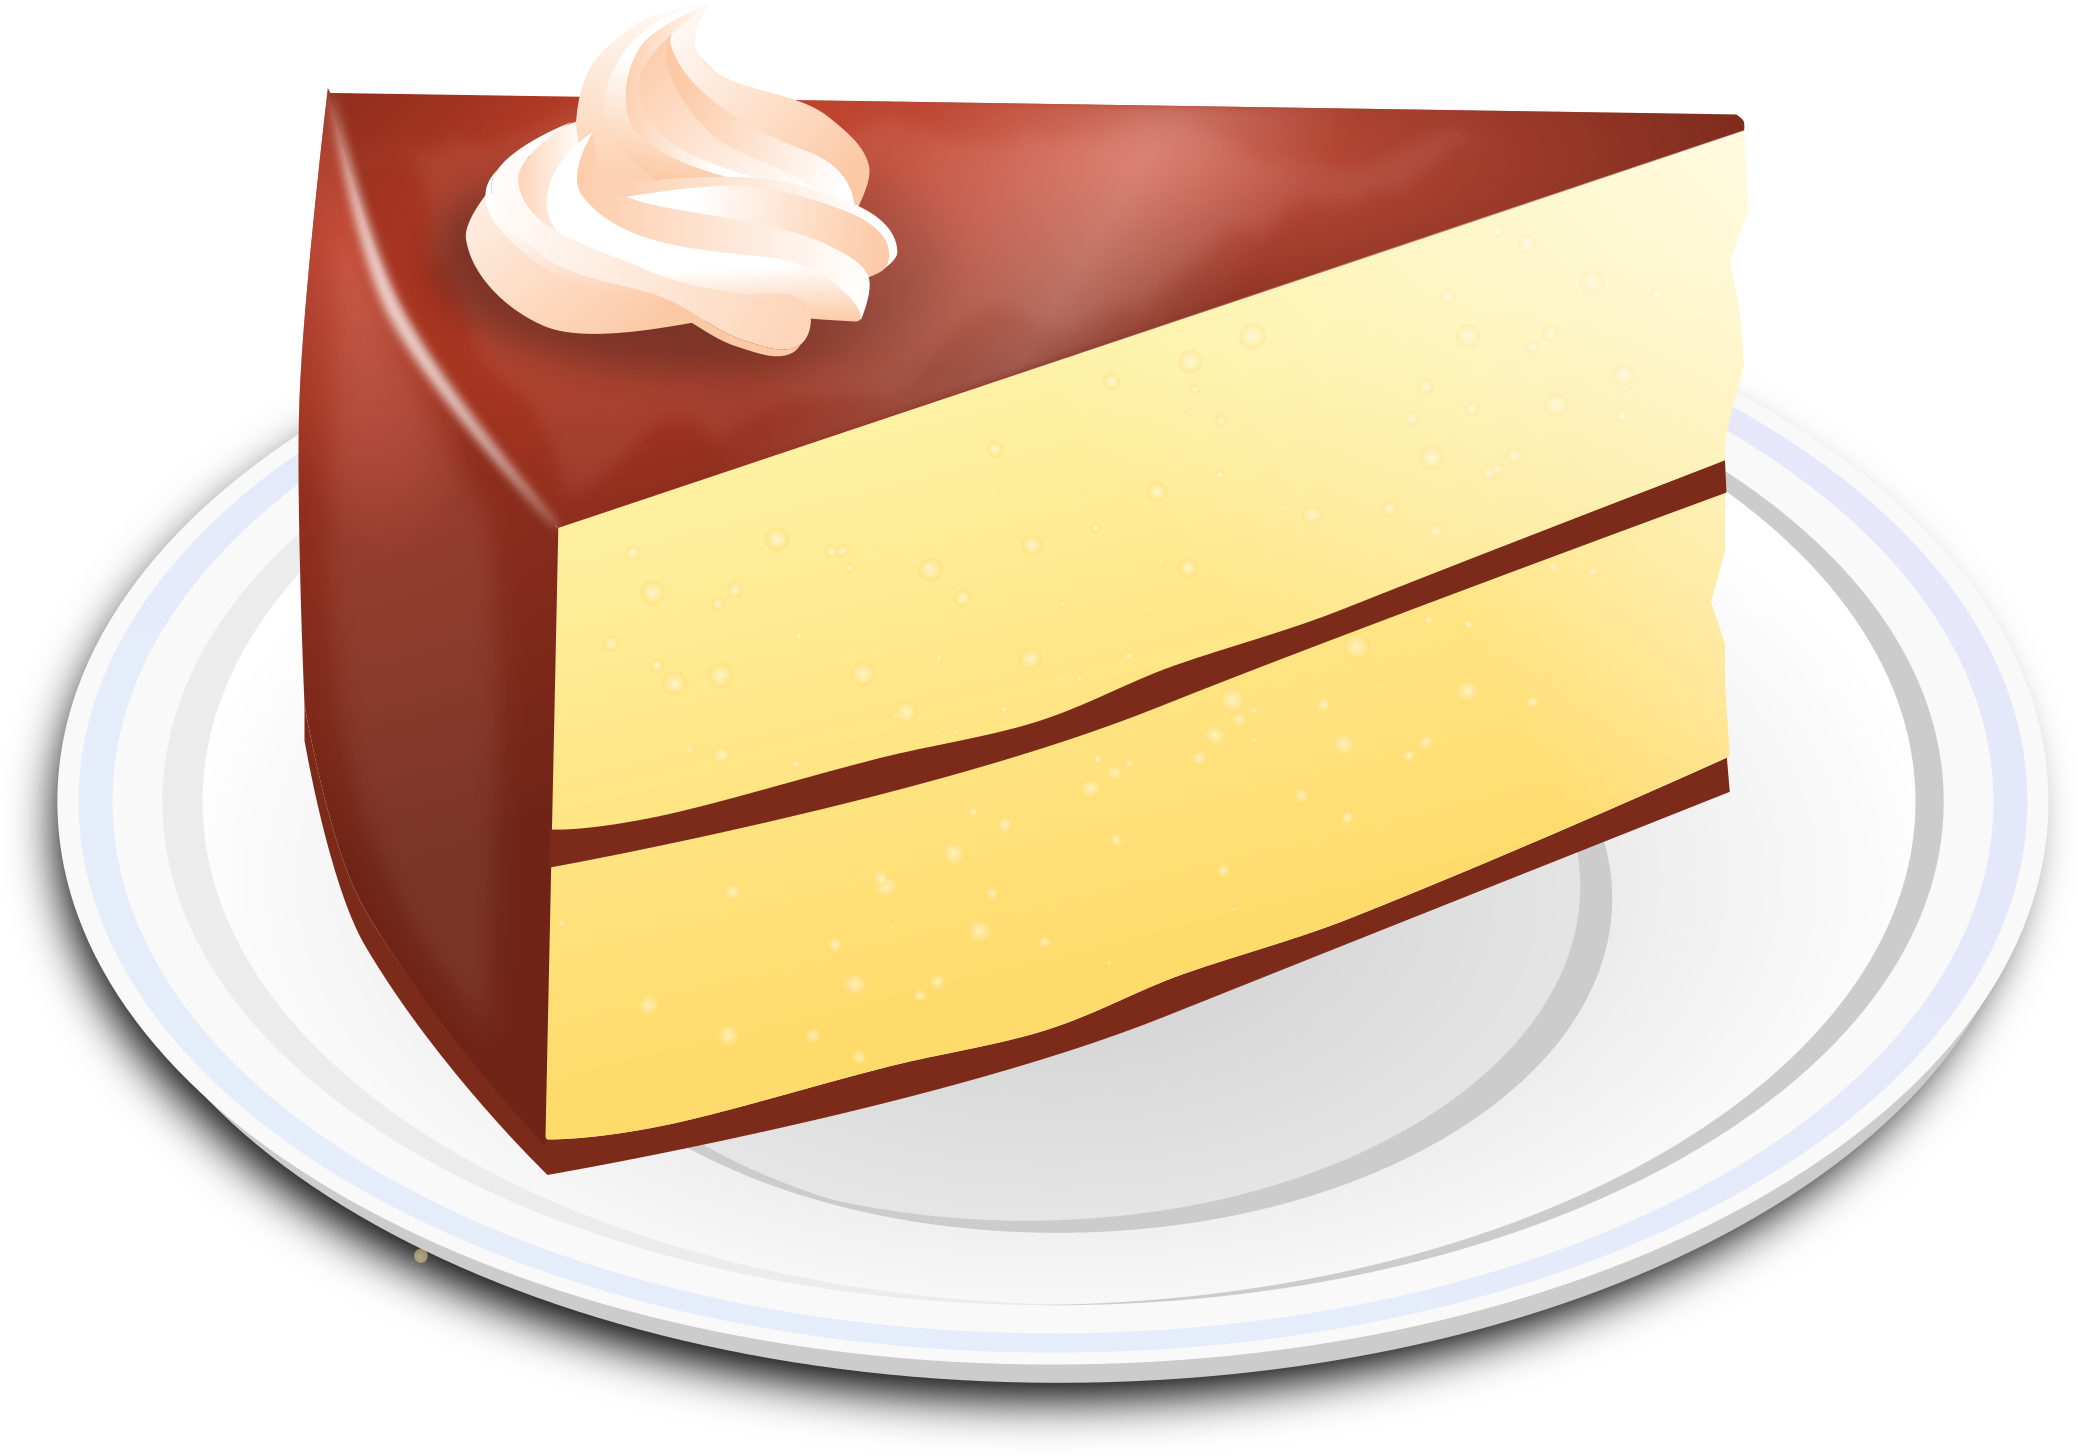 This Free Icons Png Design Of Choclate Cake Clipart (2400x1605), Png Downlo...